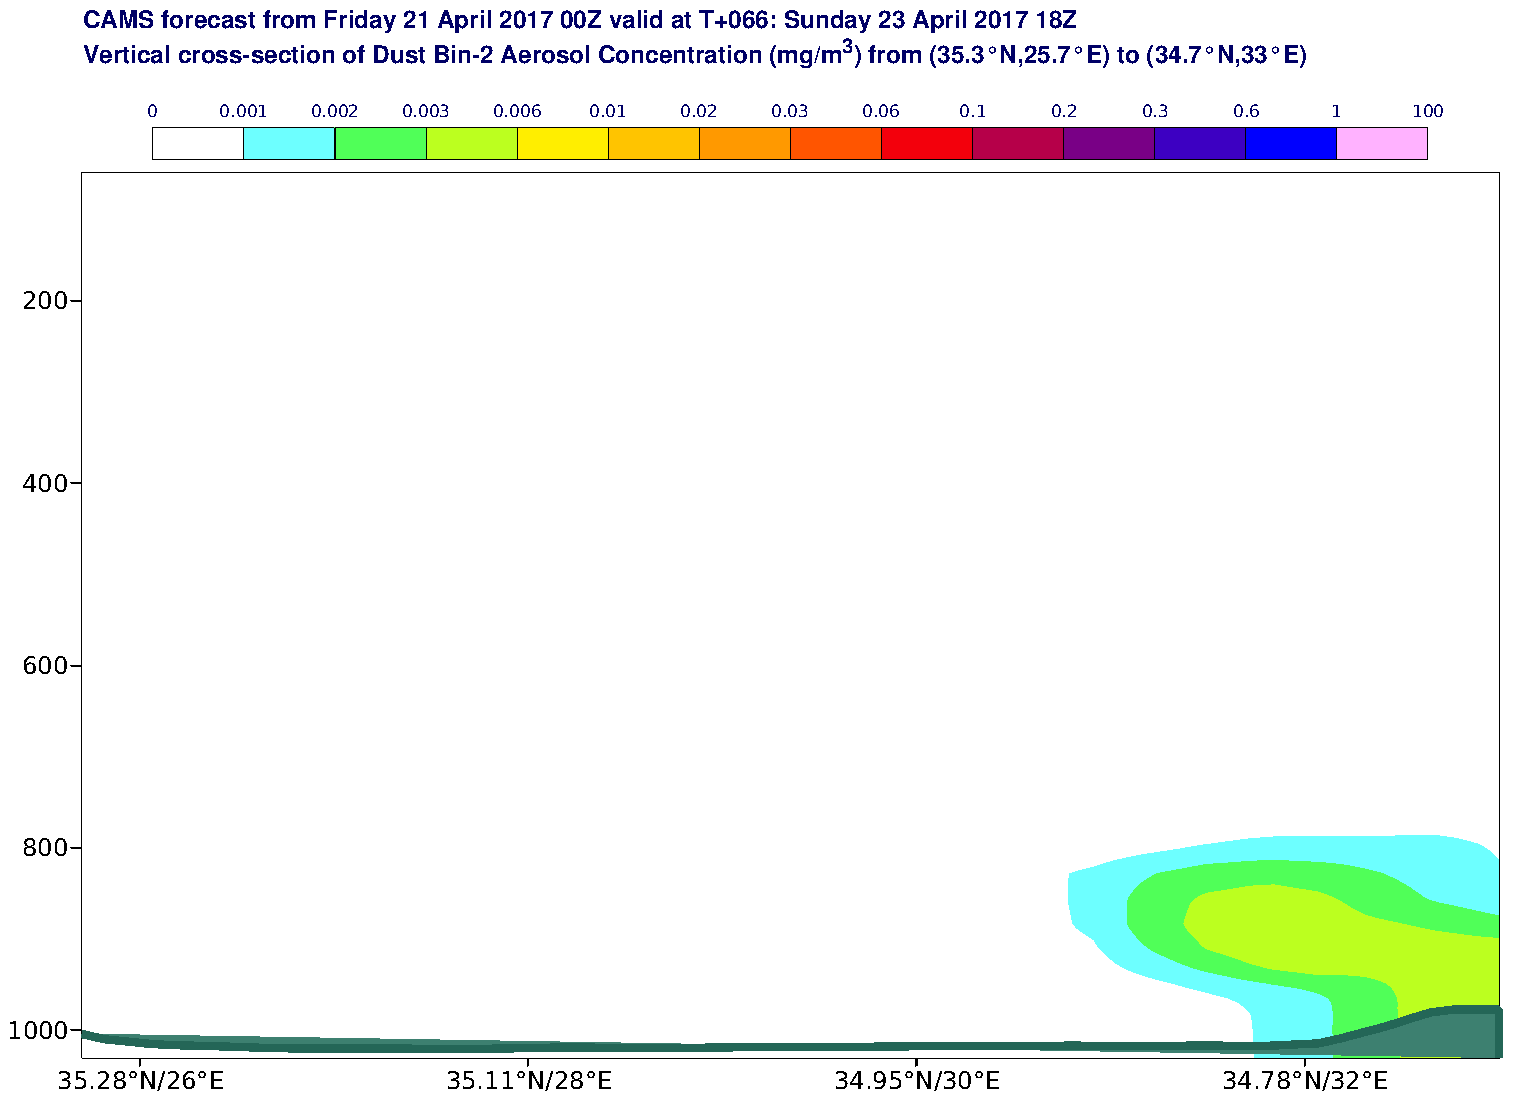 Vertical cross-section of Dust Bin-2 Aerosol Concentration (mg/m3) valid at T66 - 2017-04-23 18:00